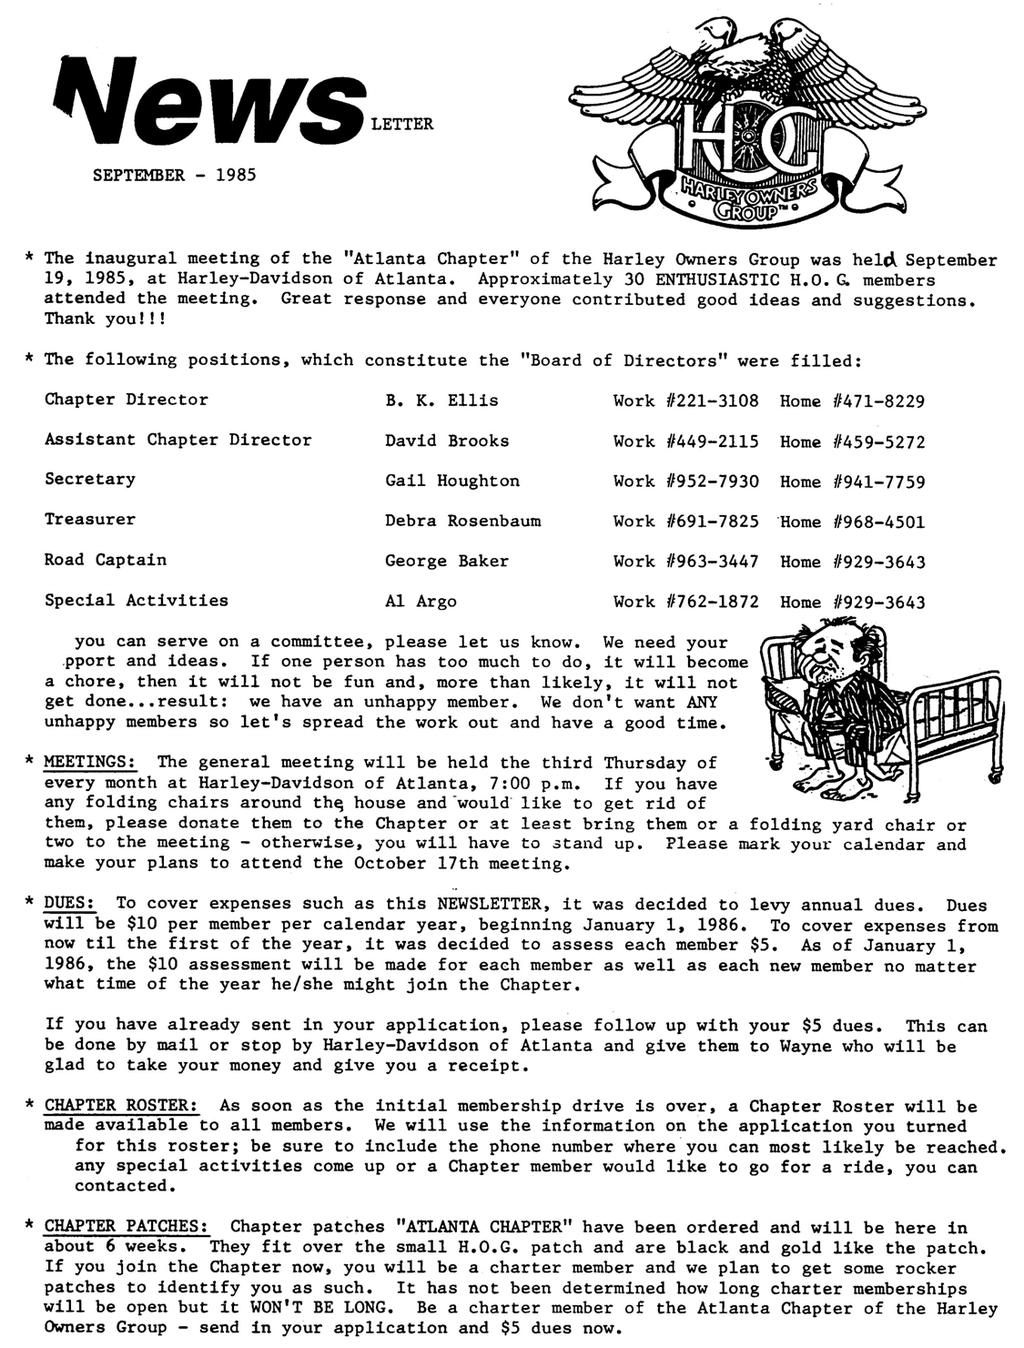 August 30, 1985 Dear H.O.G. Member: Harley-Davdson of Atlanta wll sponsor the Atlanta Chapter of the Harley Owners Group. The purpose of the local chapter s to promote motorcyclng actvtes for H.O.G. members by creatng specal chapter actvtes and encouragng partcpaton n exstng events.